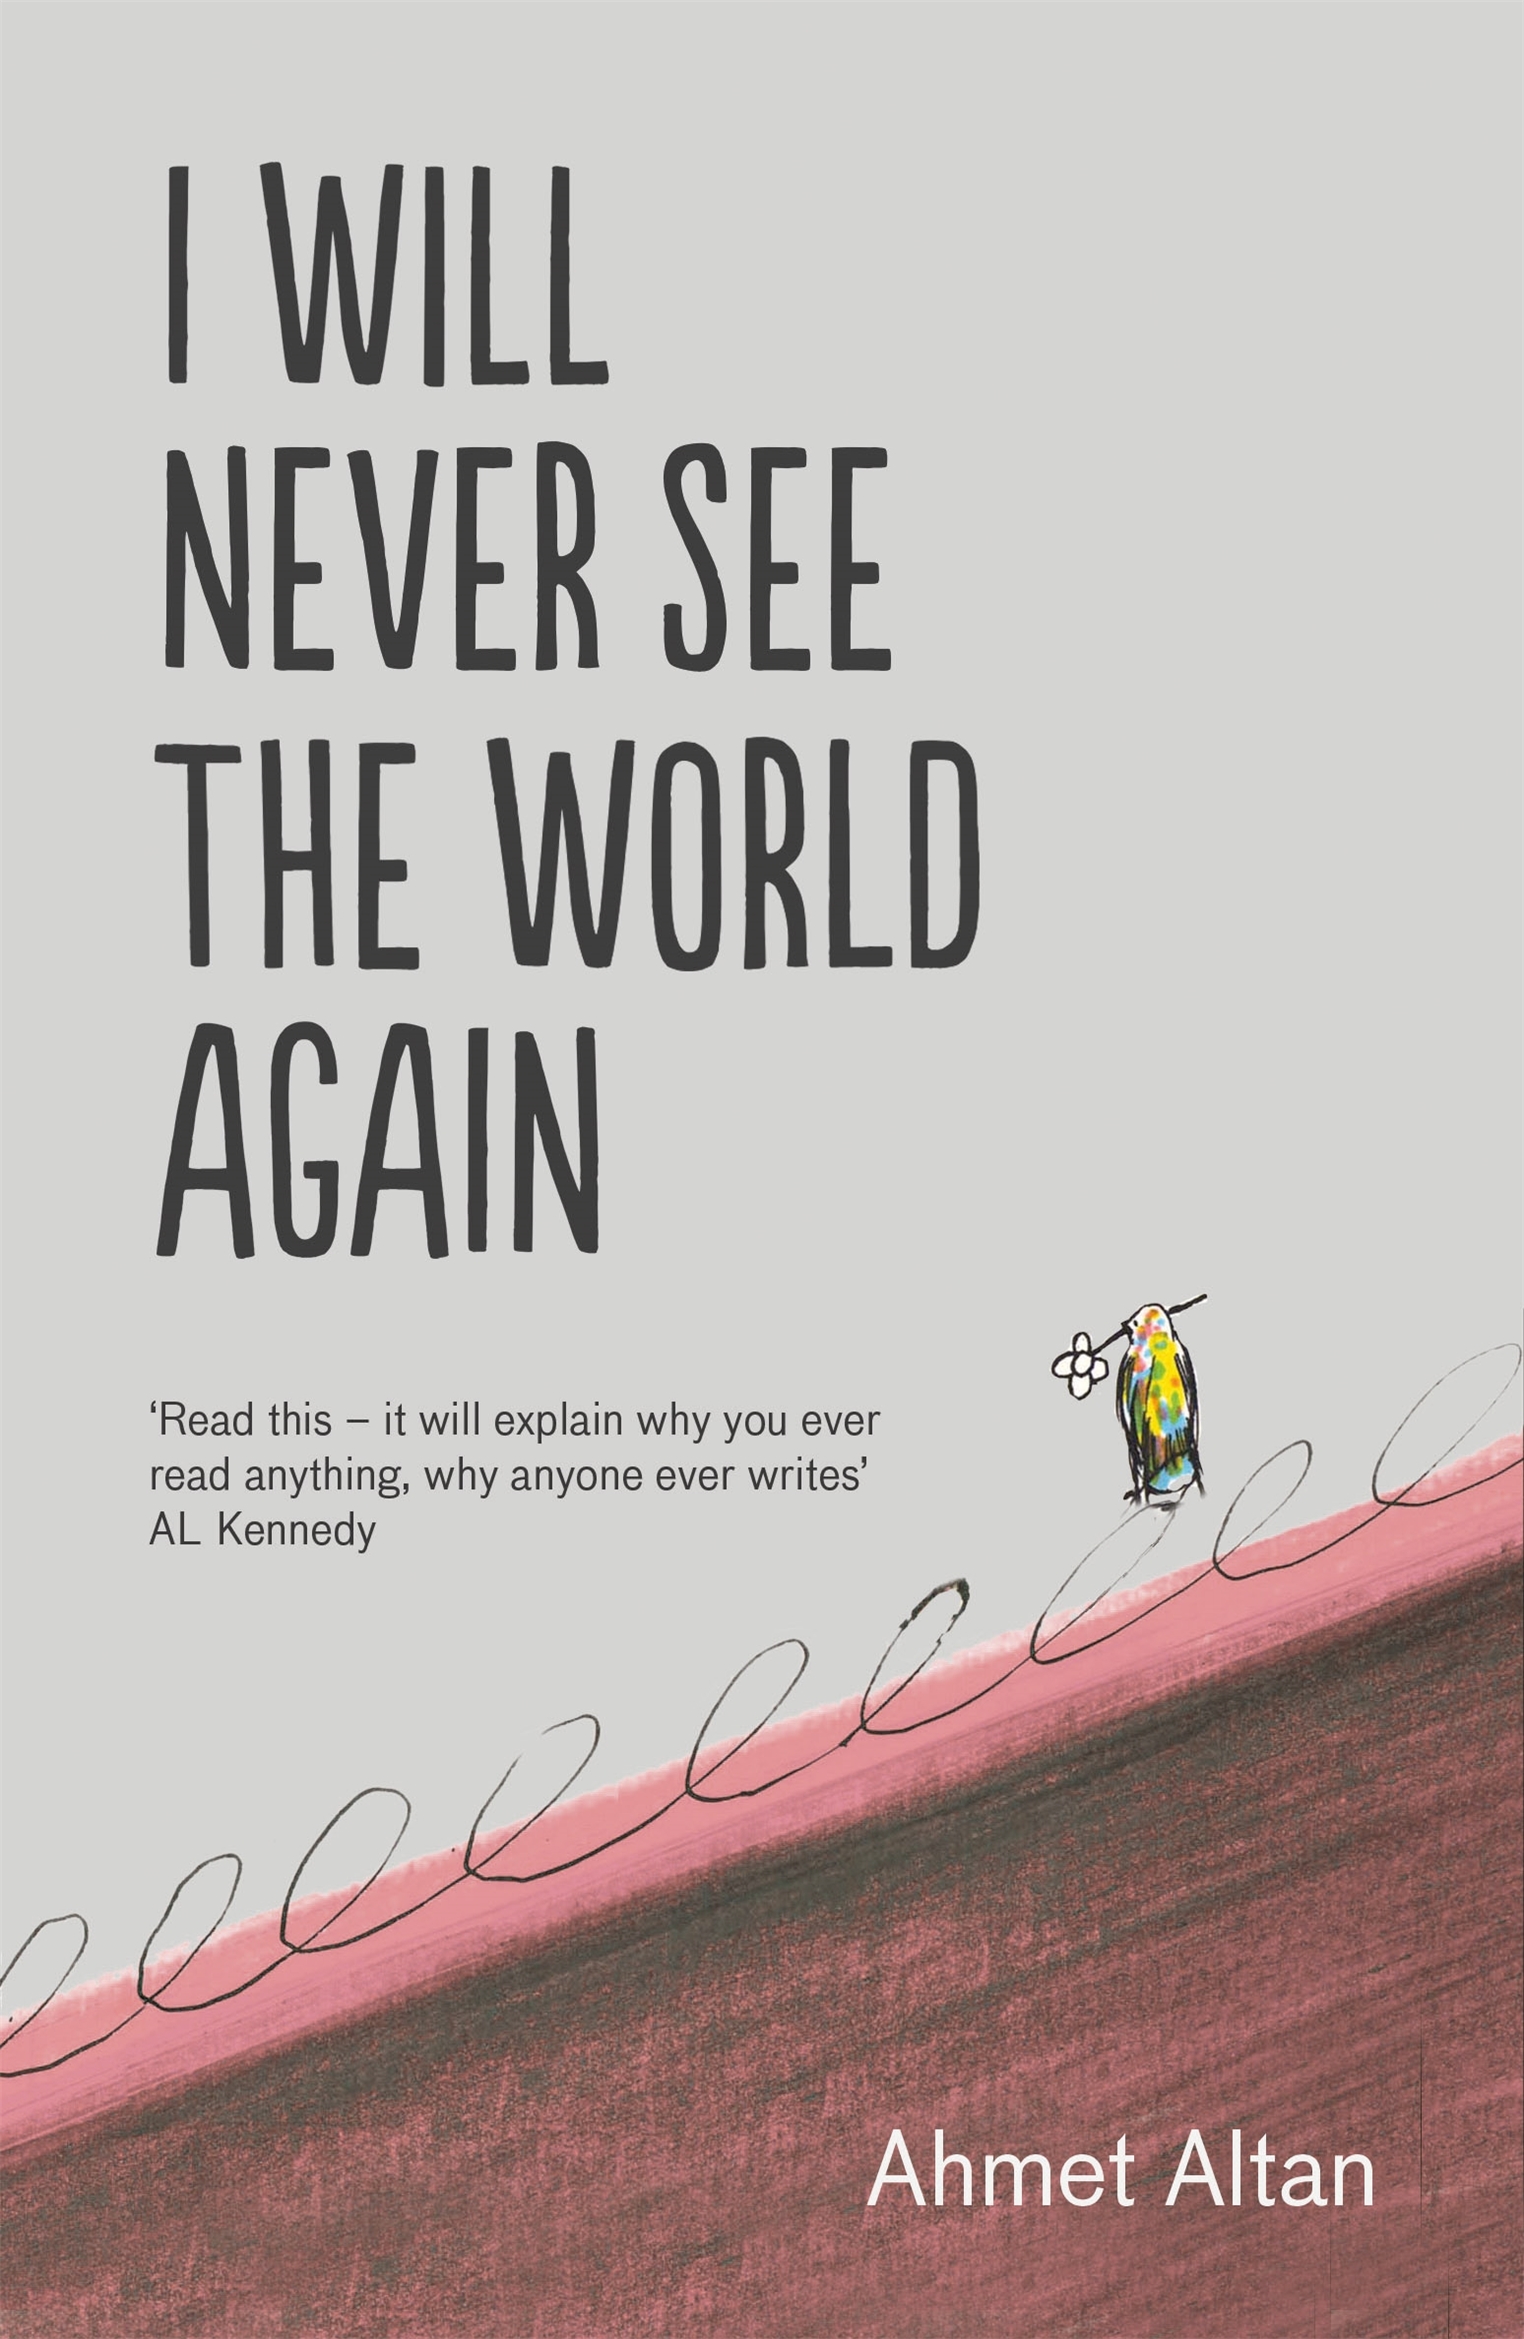 I Will Never See The World Again by Ahmet Altan